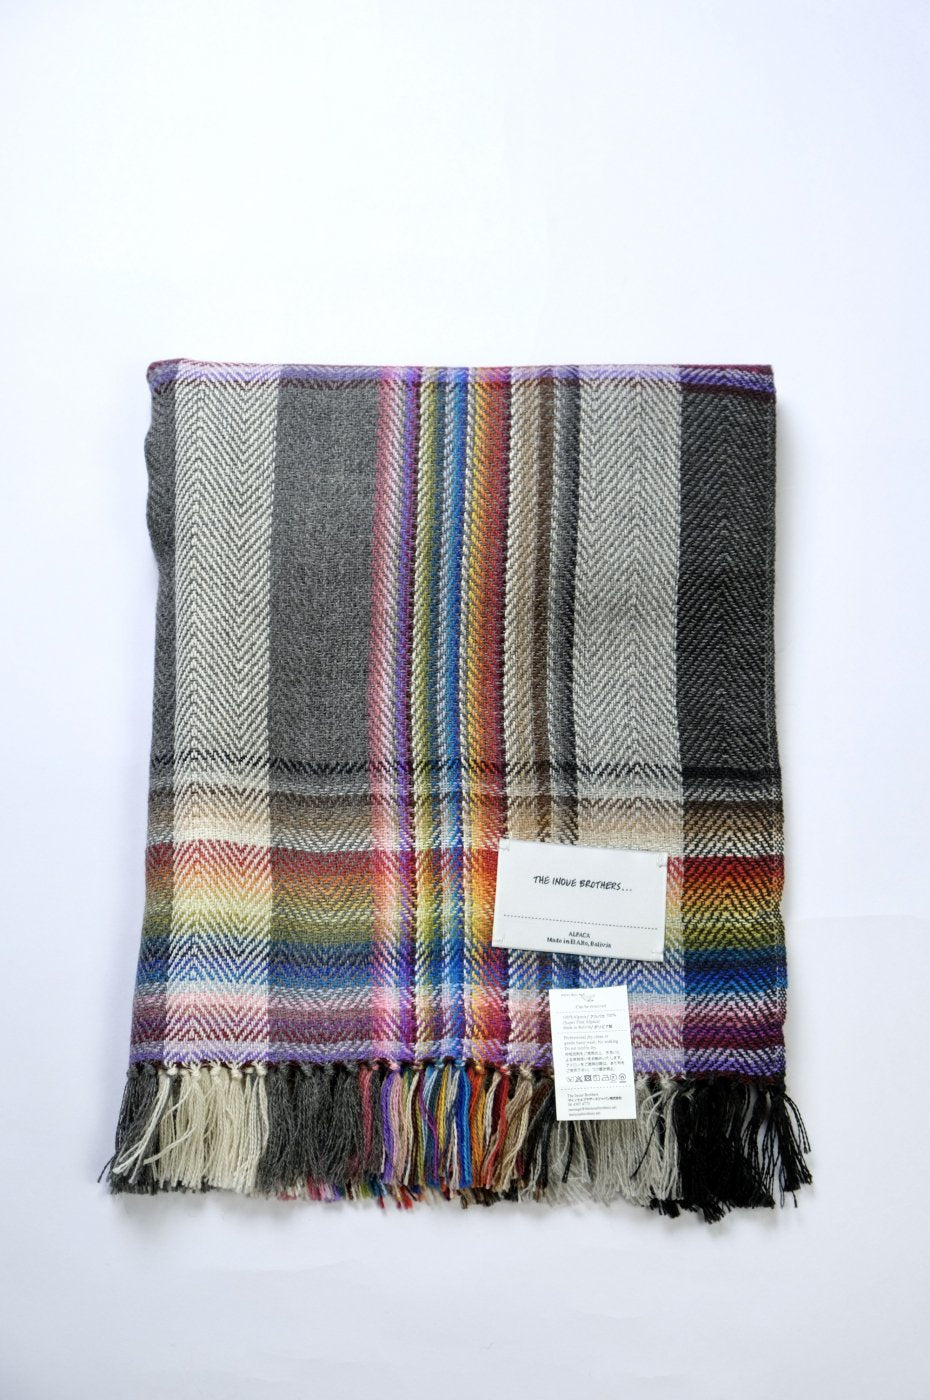 THE INOUE BROTHERS... "Multi Coloured Scarf / GREY"